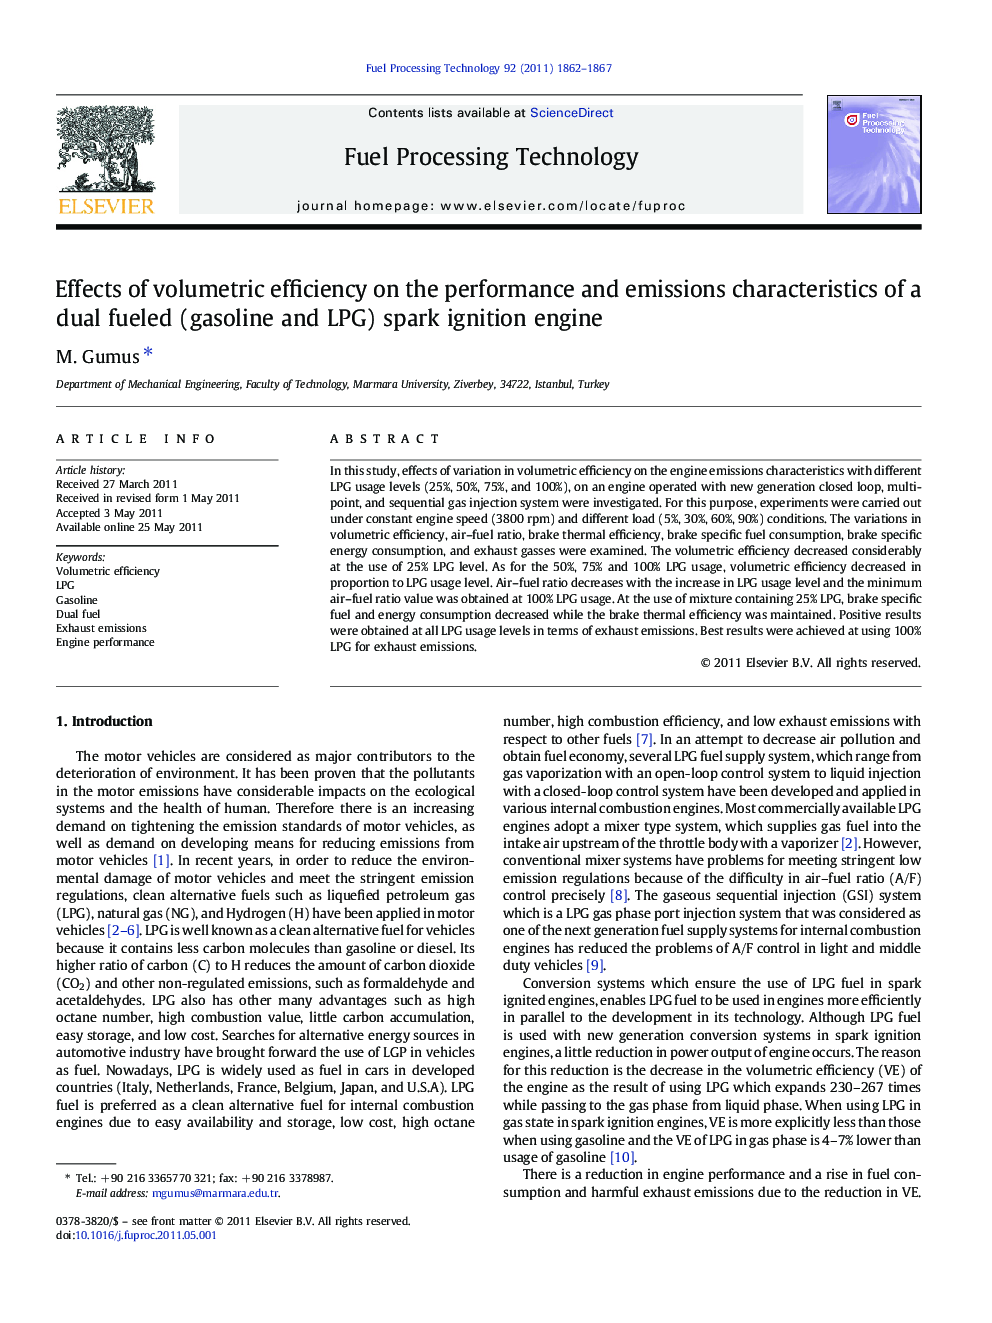 Effects of volumetric efficiency on the performance and emissions characteristics of a dual fueled (gasoline and LPG) spark ignition engine